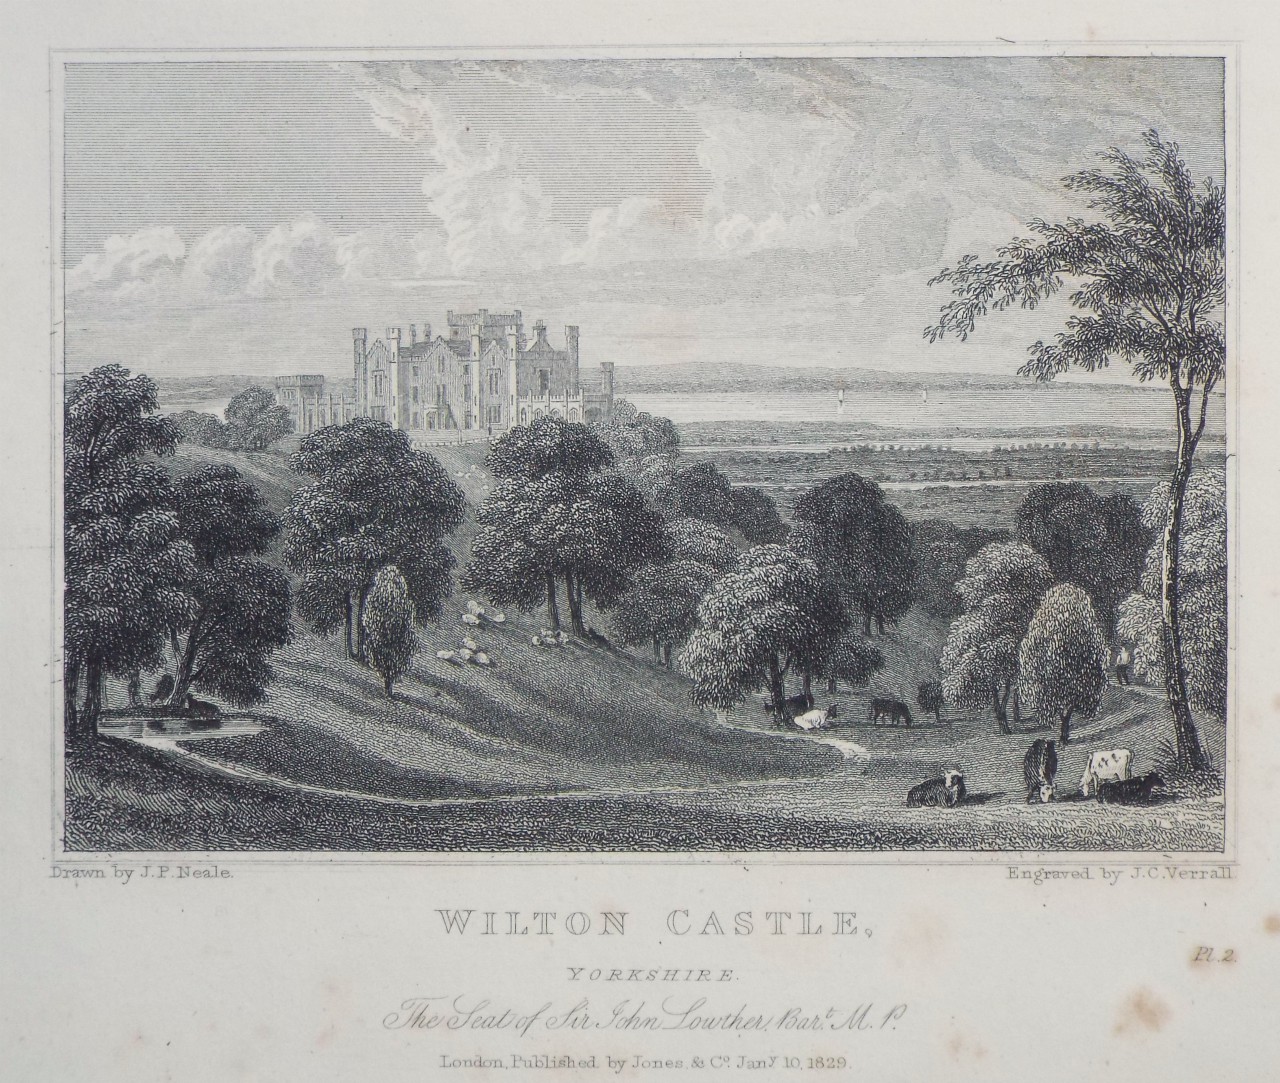 Print - Wilton Castle, Yorkshire. The Seat of Sir John Lowther, Bart. M.P. - Varrall